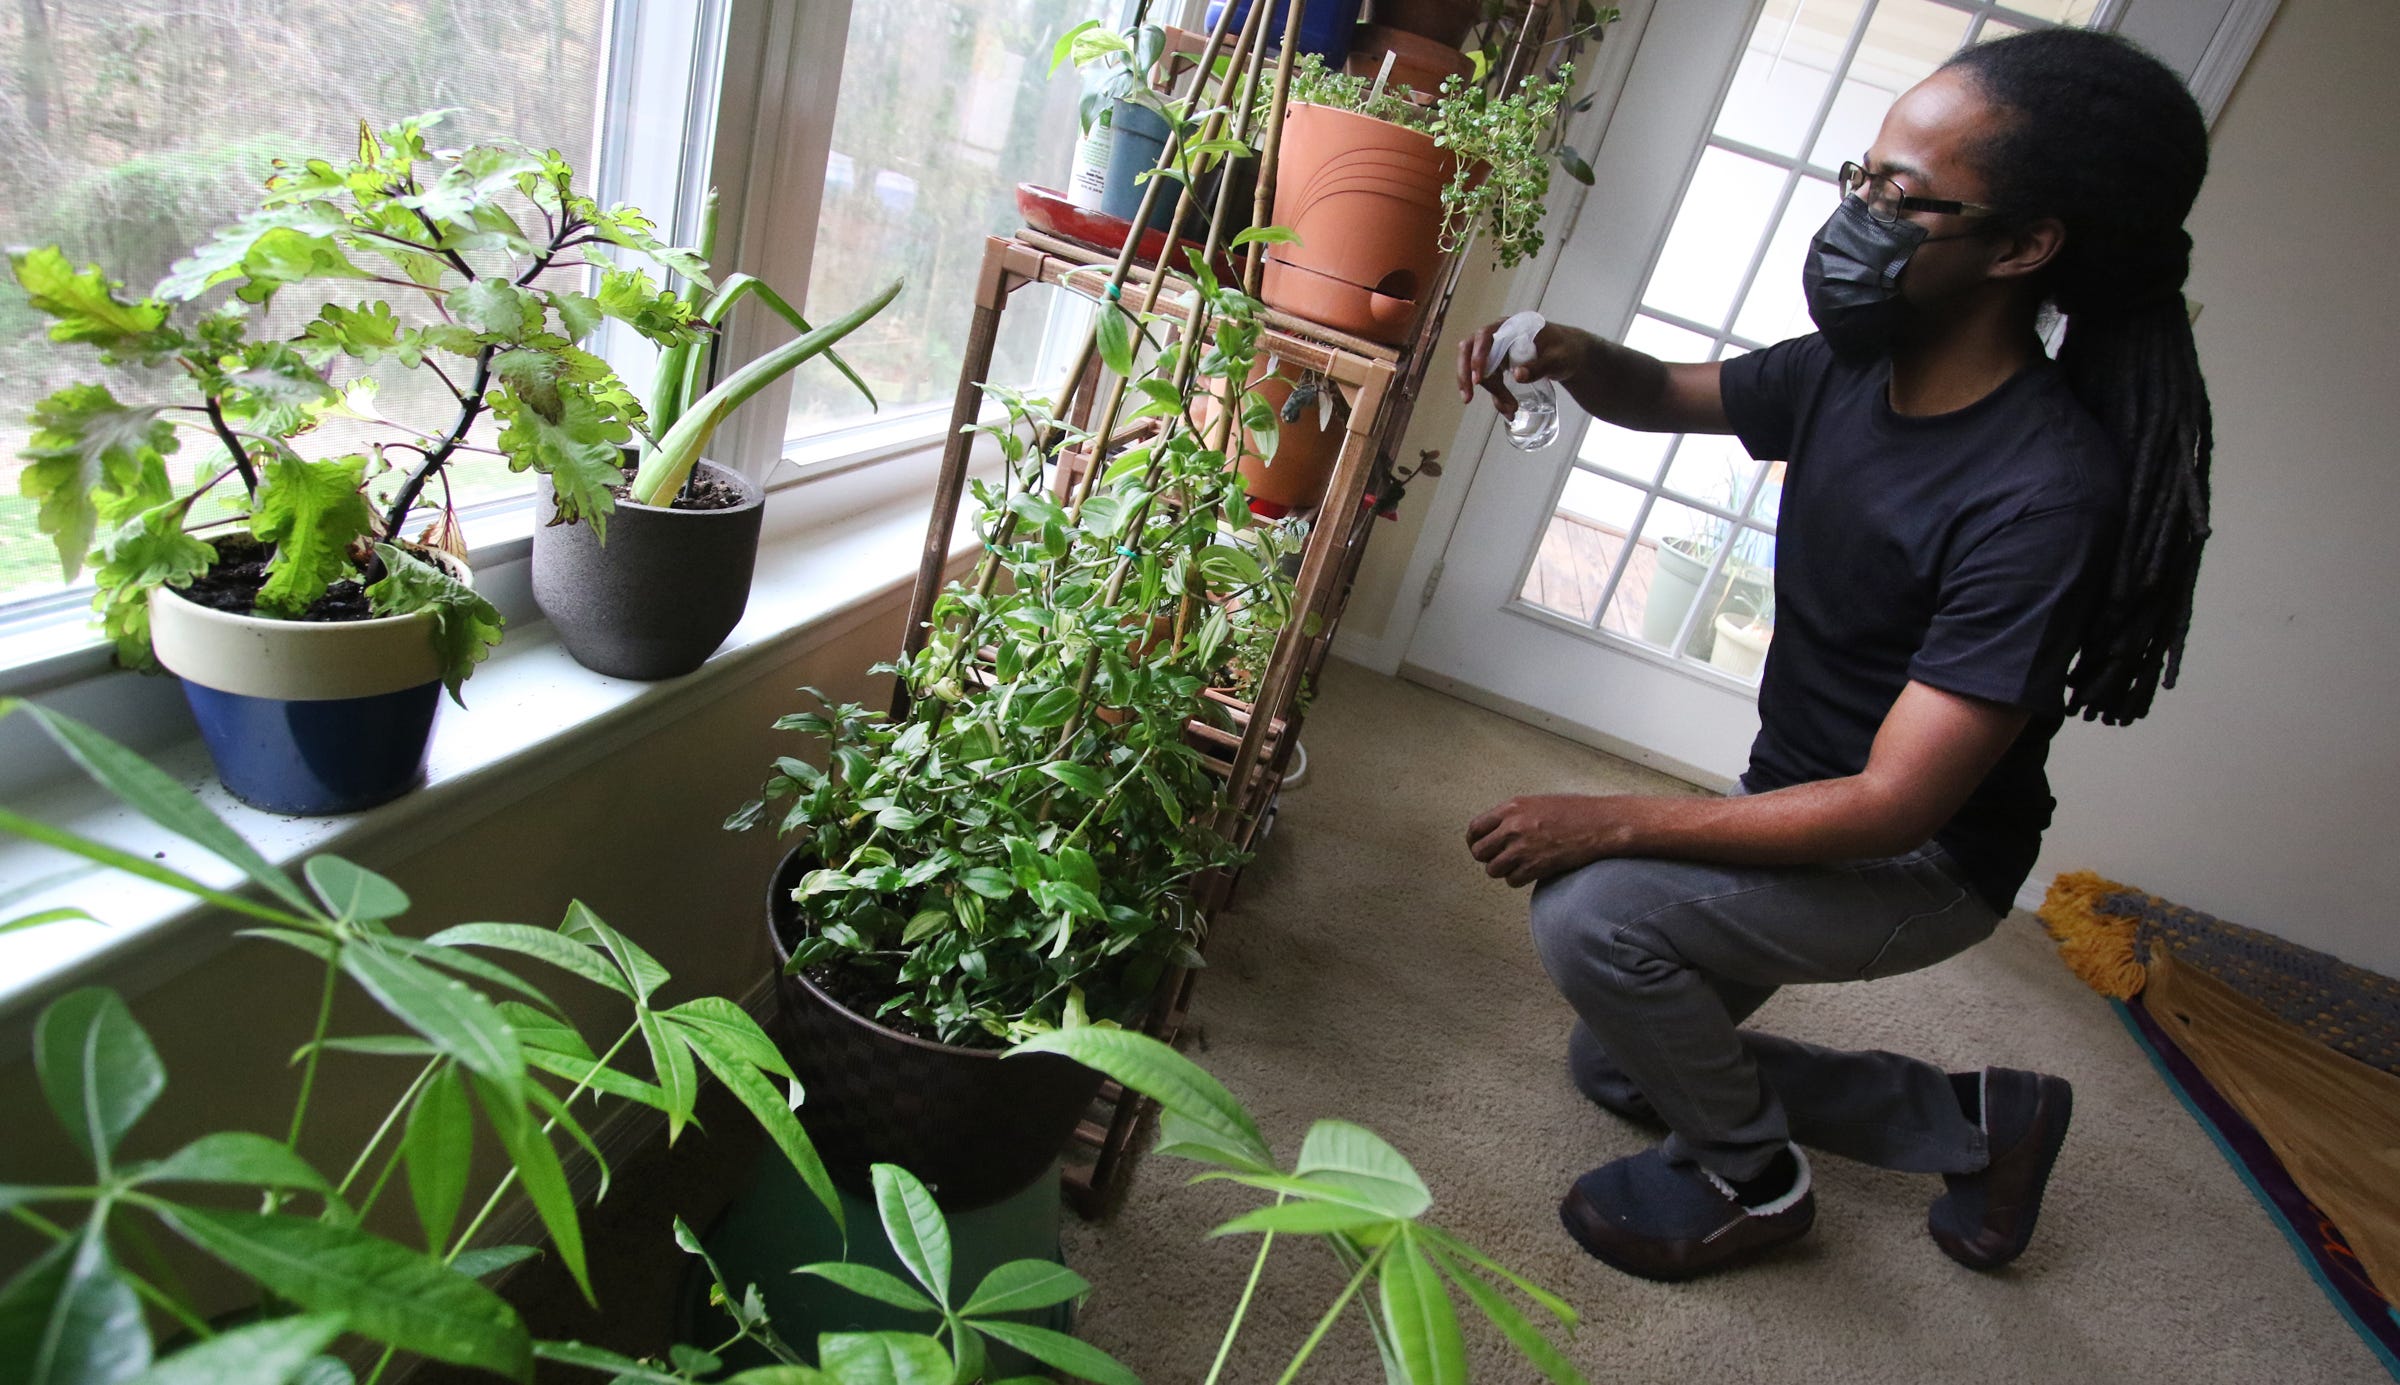 Gaston College student Lyn Holland waters the plants in his apartment on Loblolly PineDrive in Gastonia. The local housing authority, which issued Holland’s voucher, cut his benefits last year. Officials told Holland this spring he would have to move or pay $200 more a month in rent because he did not qualify for a two-bedroom apartment.